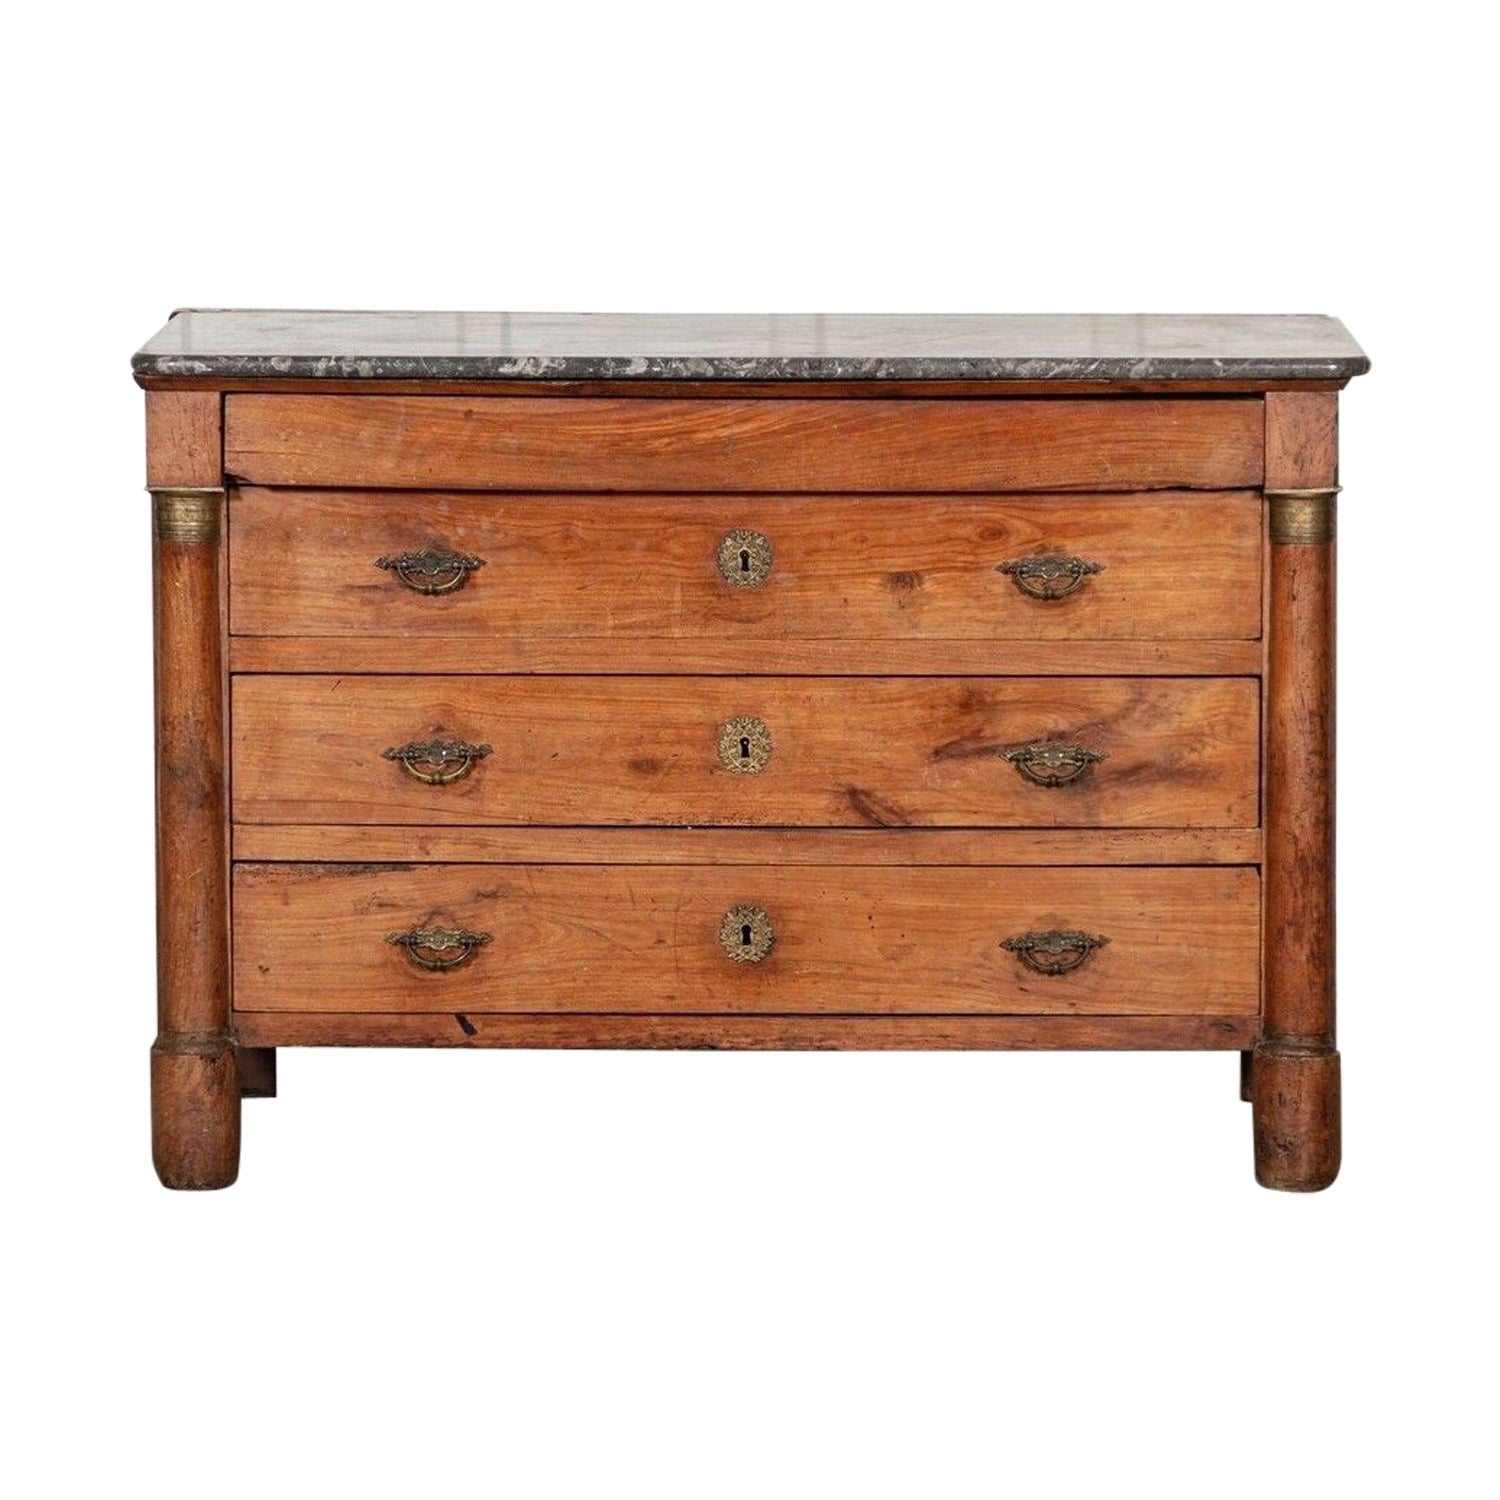 19th Century French Marble Empire Fruitwood Commode For Sale